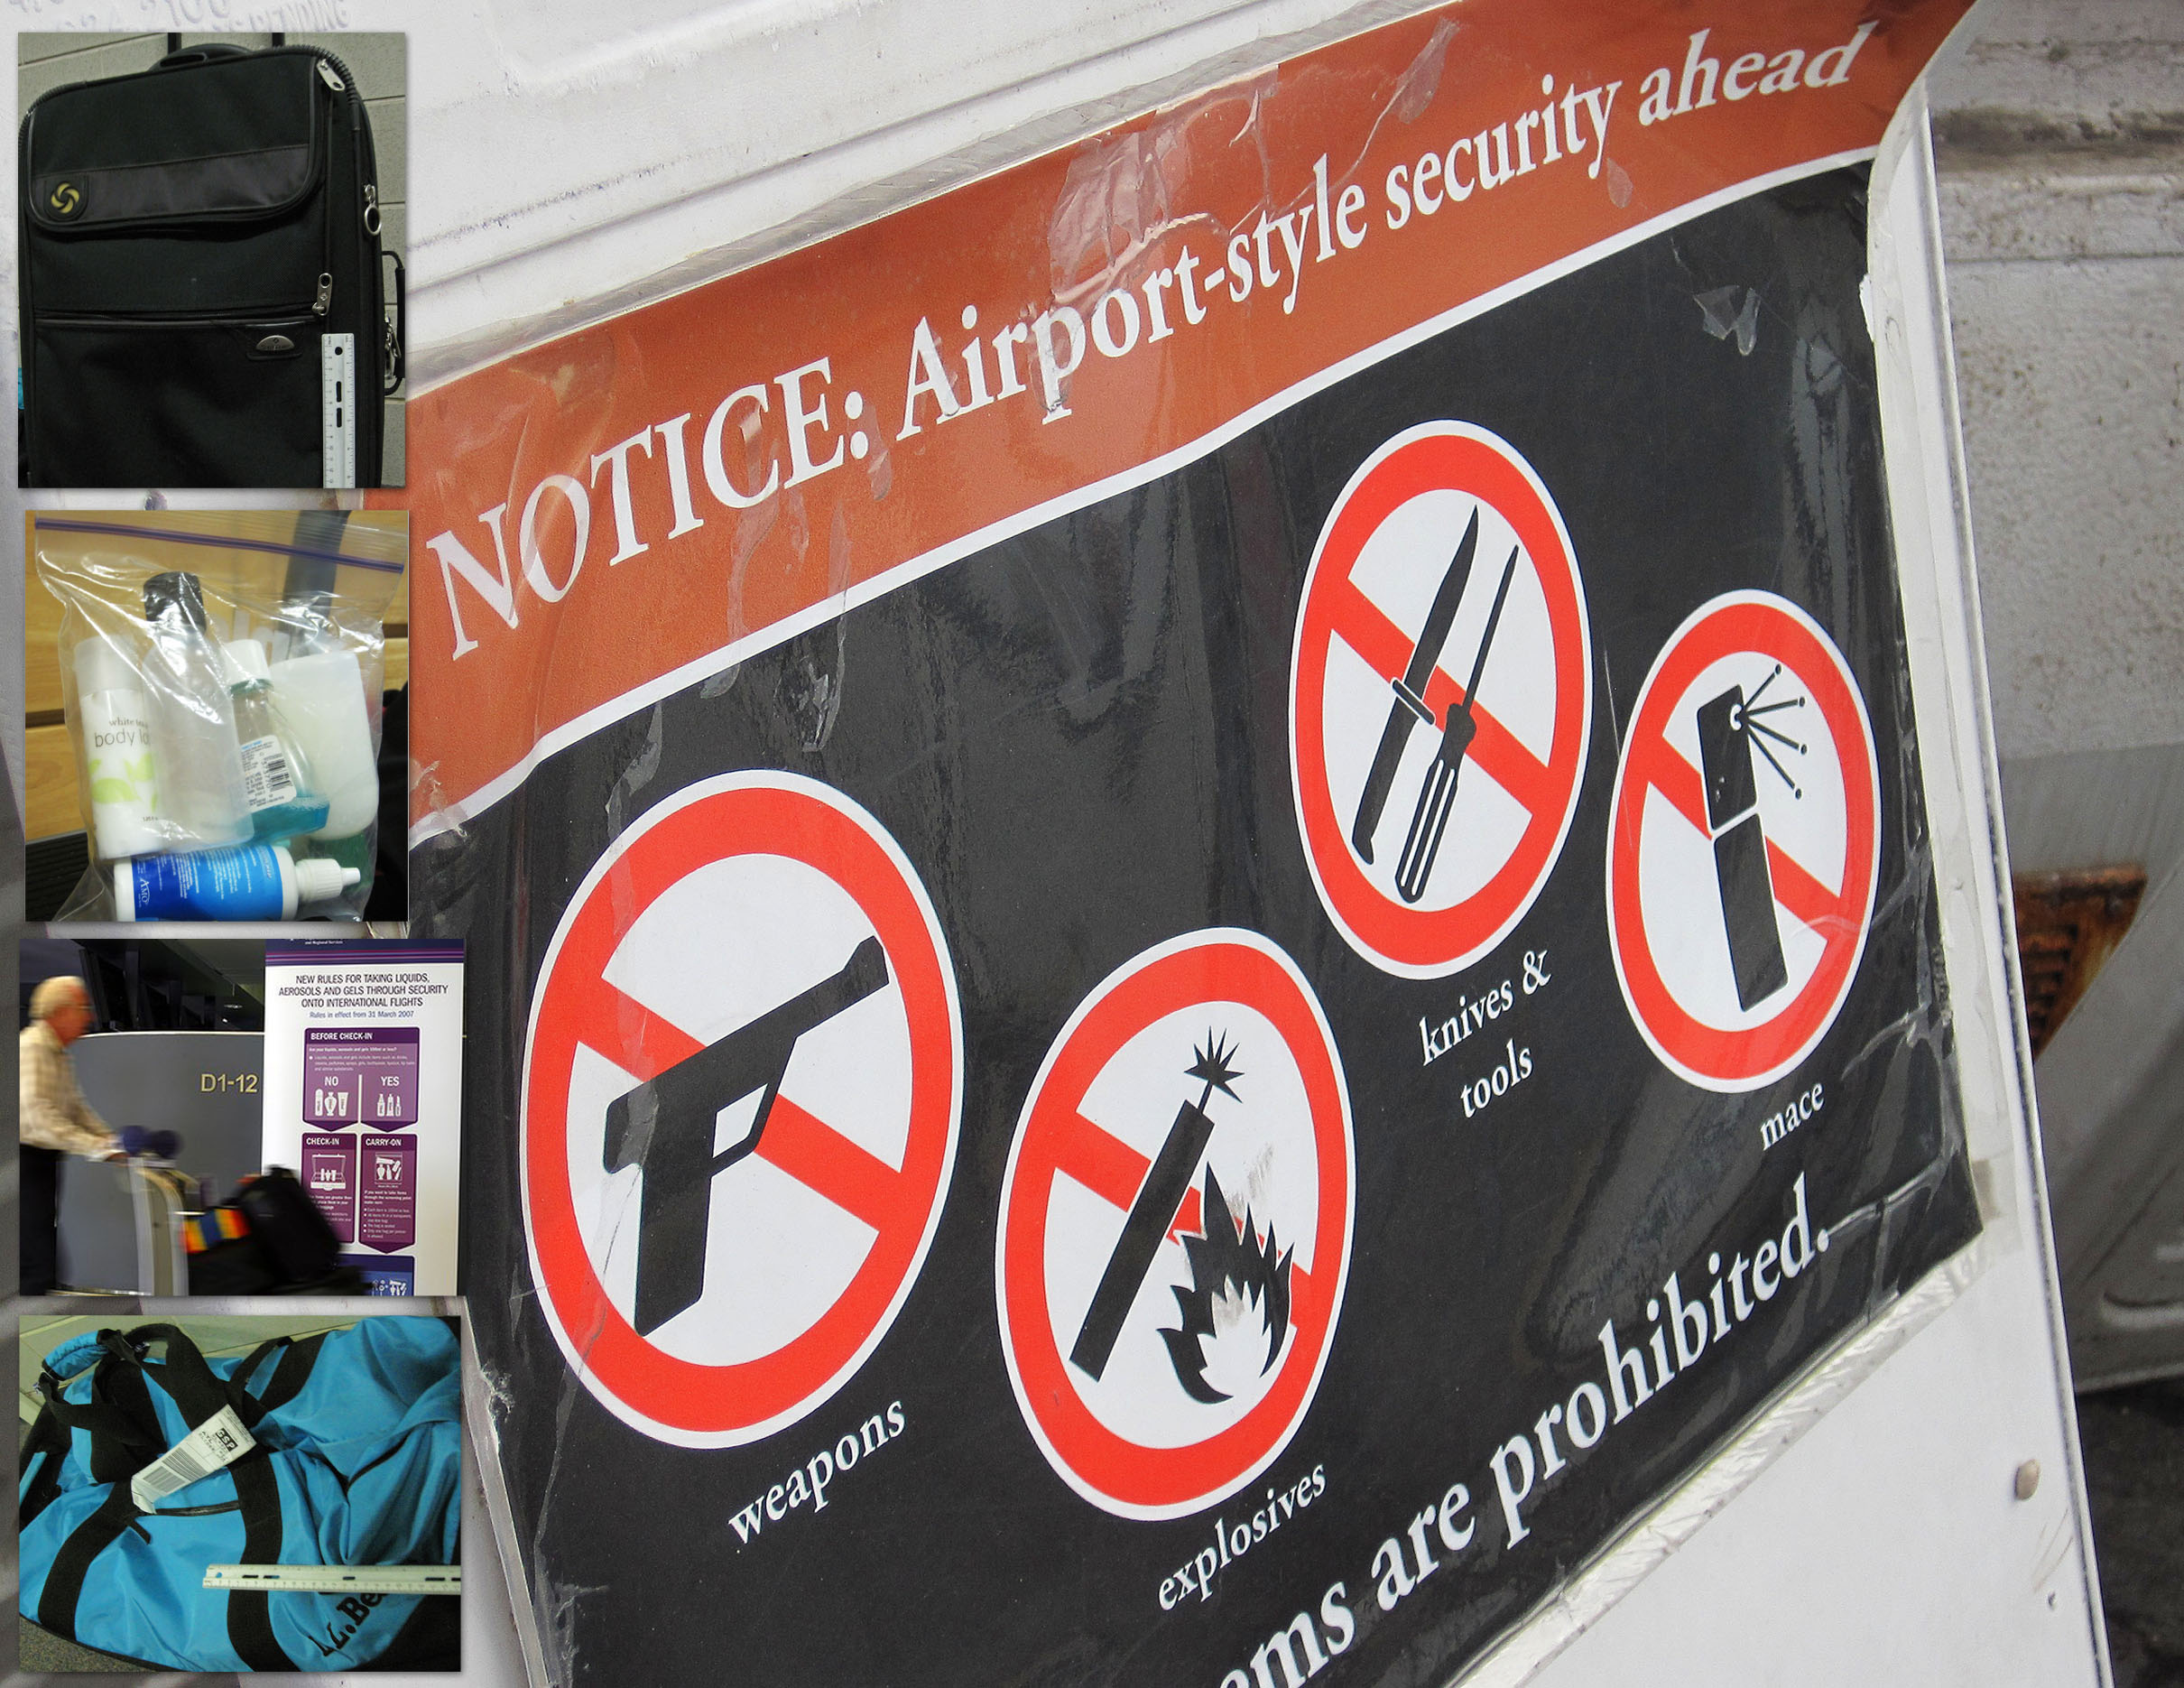 Current security measures include weight and size requirements for baggage, liquid restrictons, and bans on explosives or weapons in luggage.